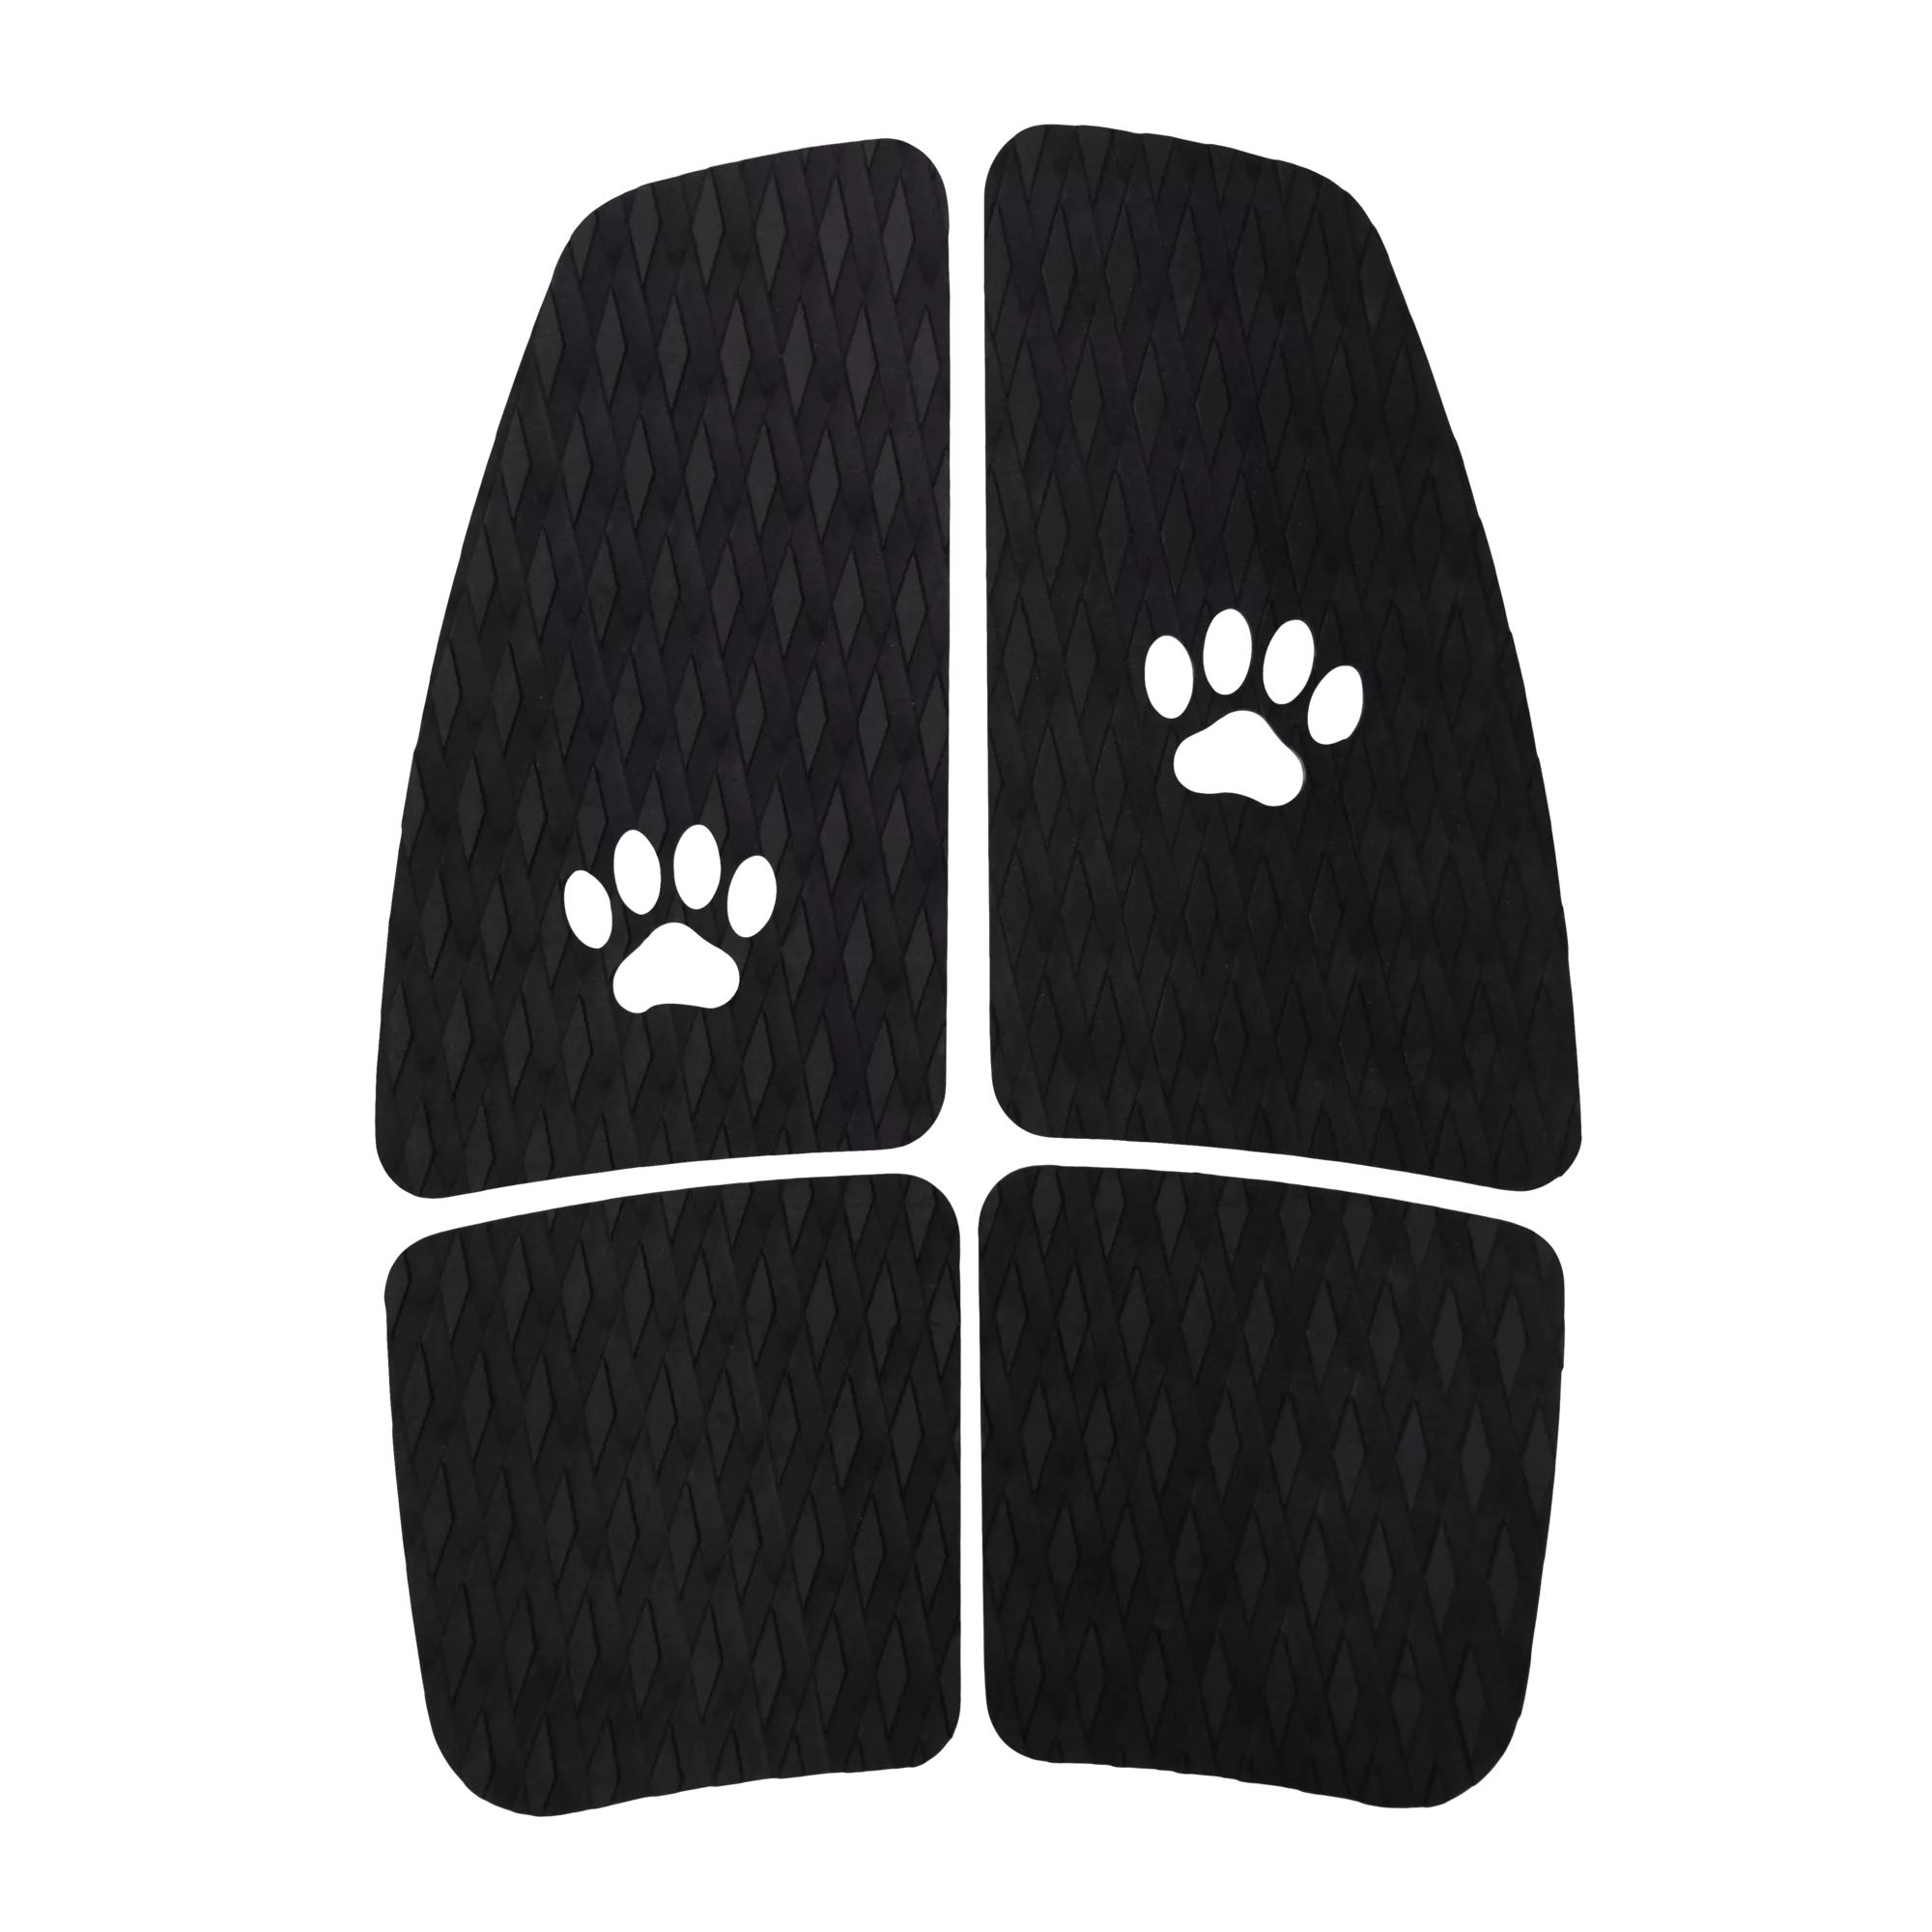 PELICAN - Dog Traction Pad for Kayaks - Black - PS1964-00 - TOP